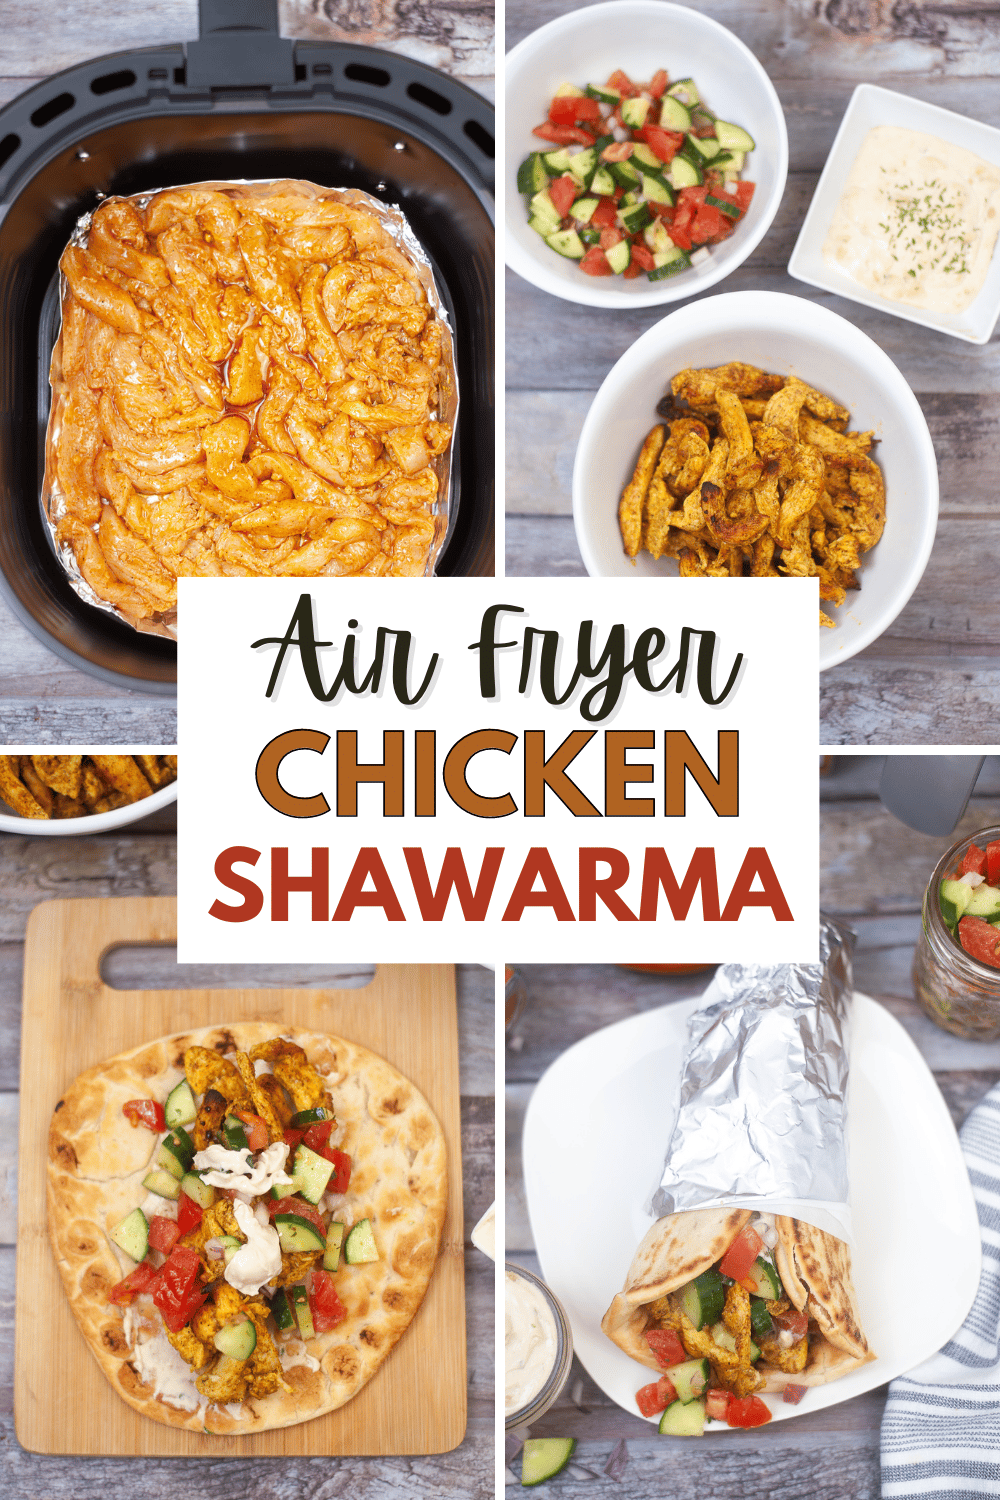 This Air Fryer Chicken Shawarma is a delicious twist on the traditional Middle Eastern dish. It's an easy meal your family will enjoy. #airfryerchickenshawarma #airfryer #chickenshawarma #chicken #dinnerrecipe via @wondermomwannab